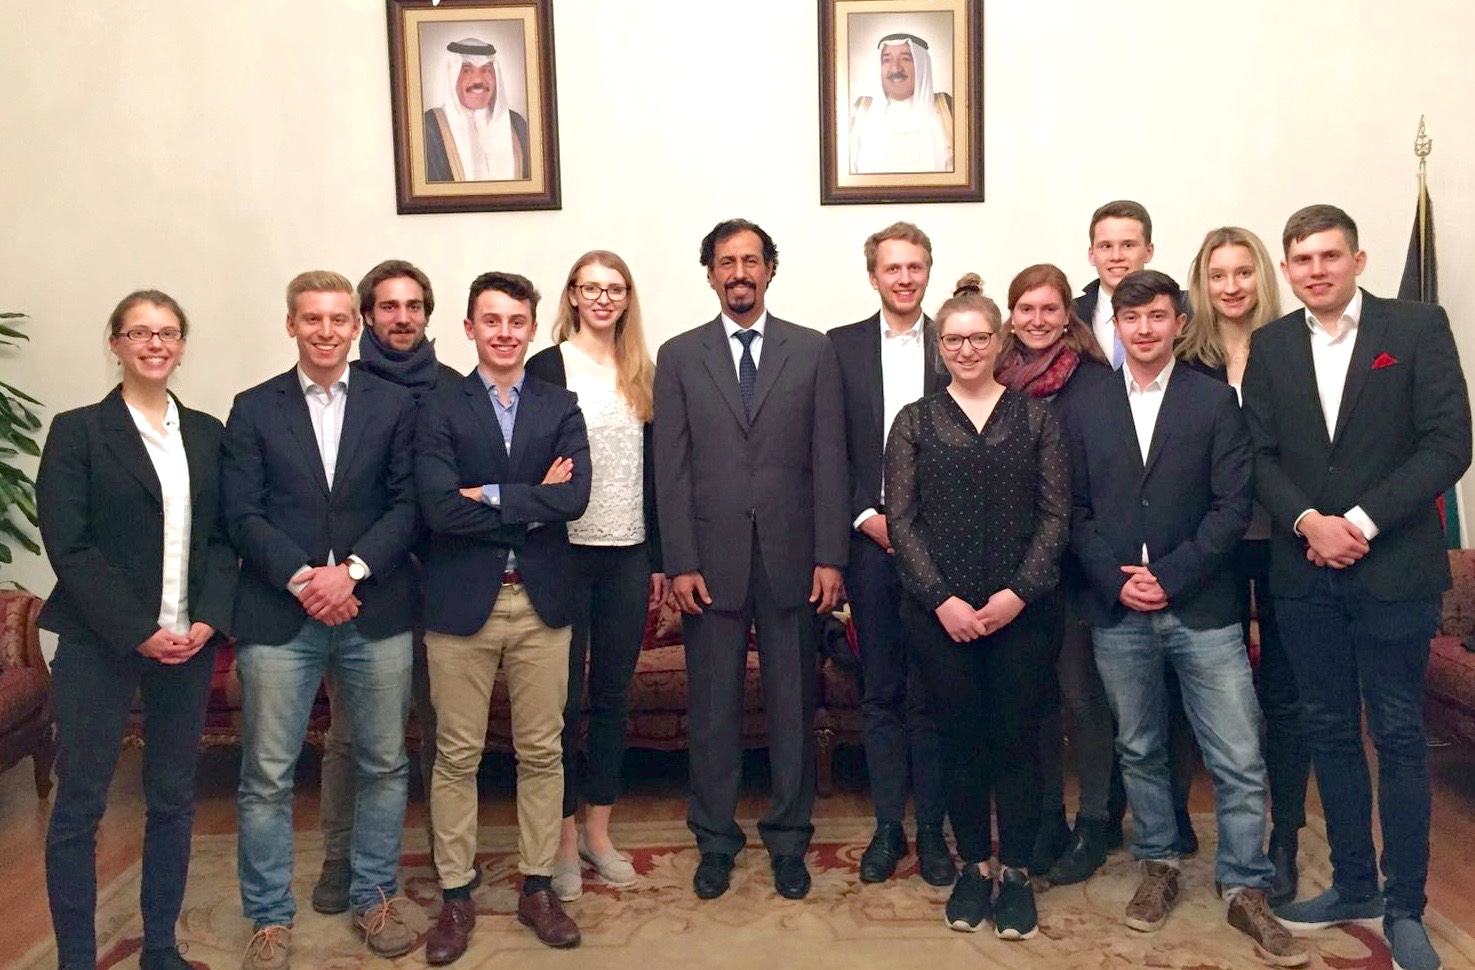 The Ambassador of Kuwait to Italy Sheikh Ali Al-Khalid Al-Jaber Al-Ahmad Al-Sabah with  group of students from Friedrich-Schiller-University of Jena in Germany